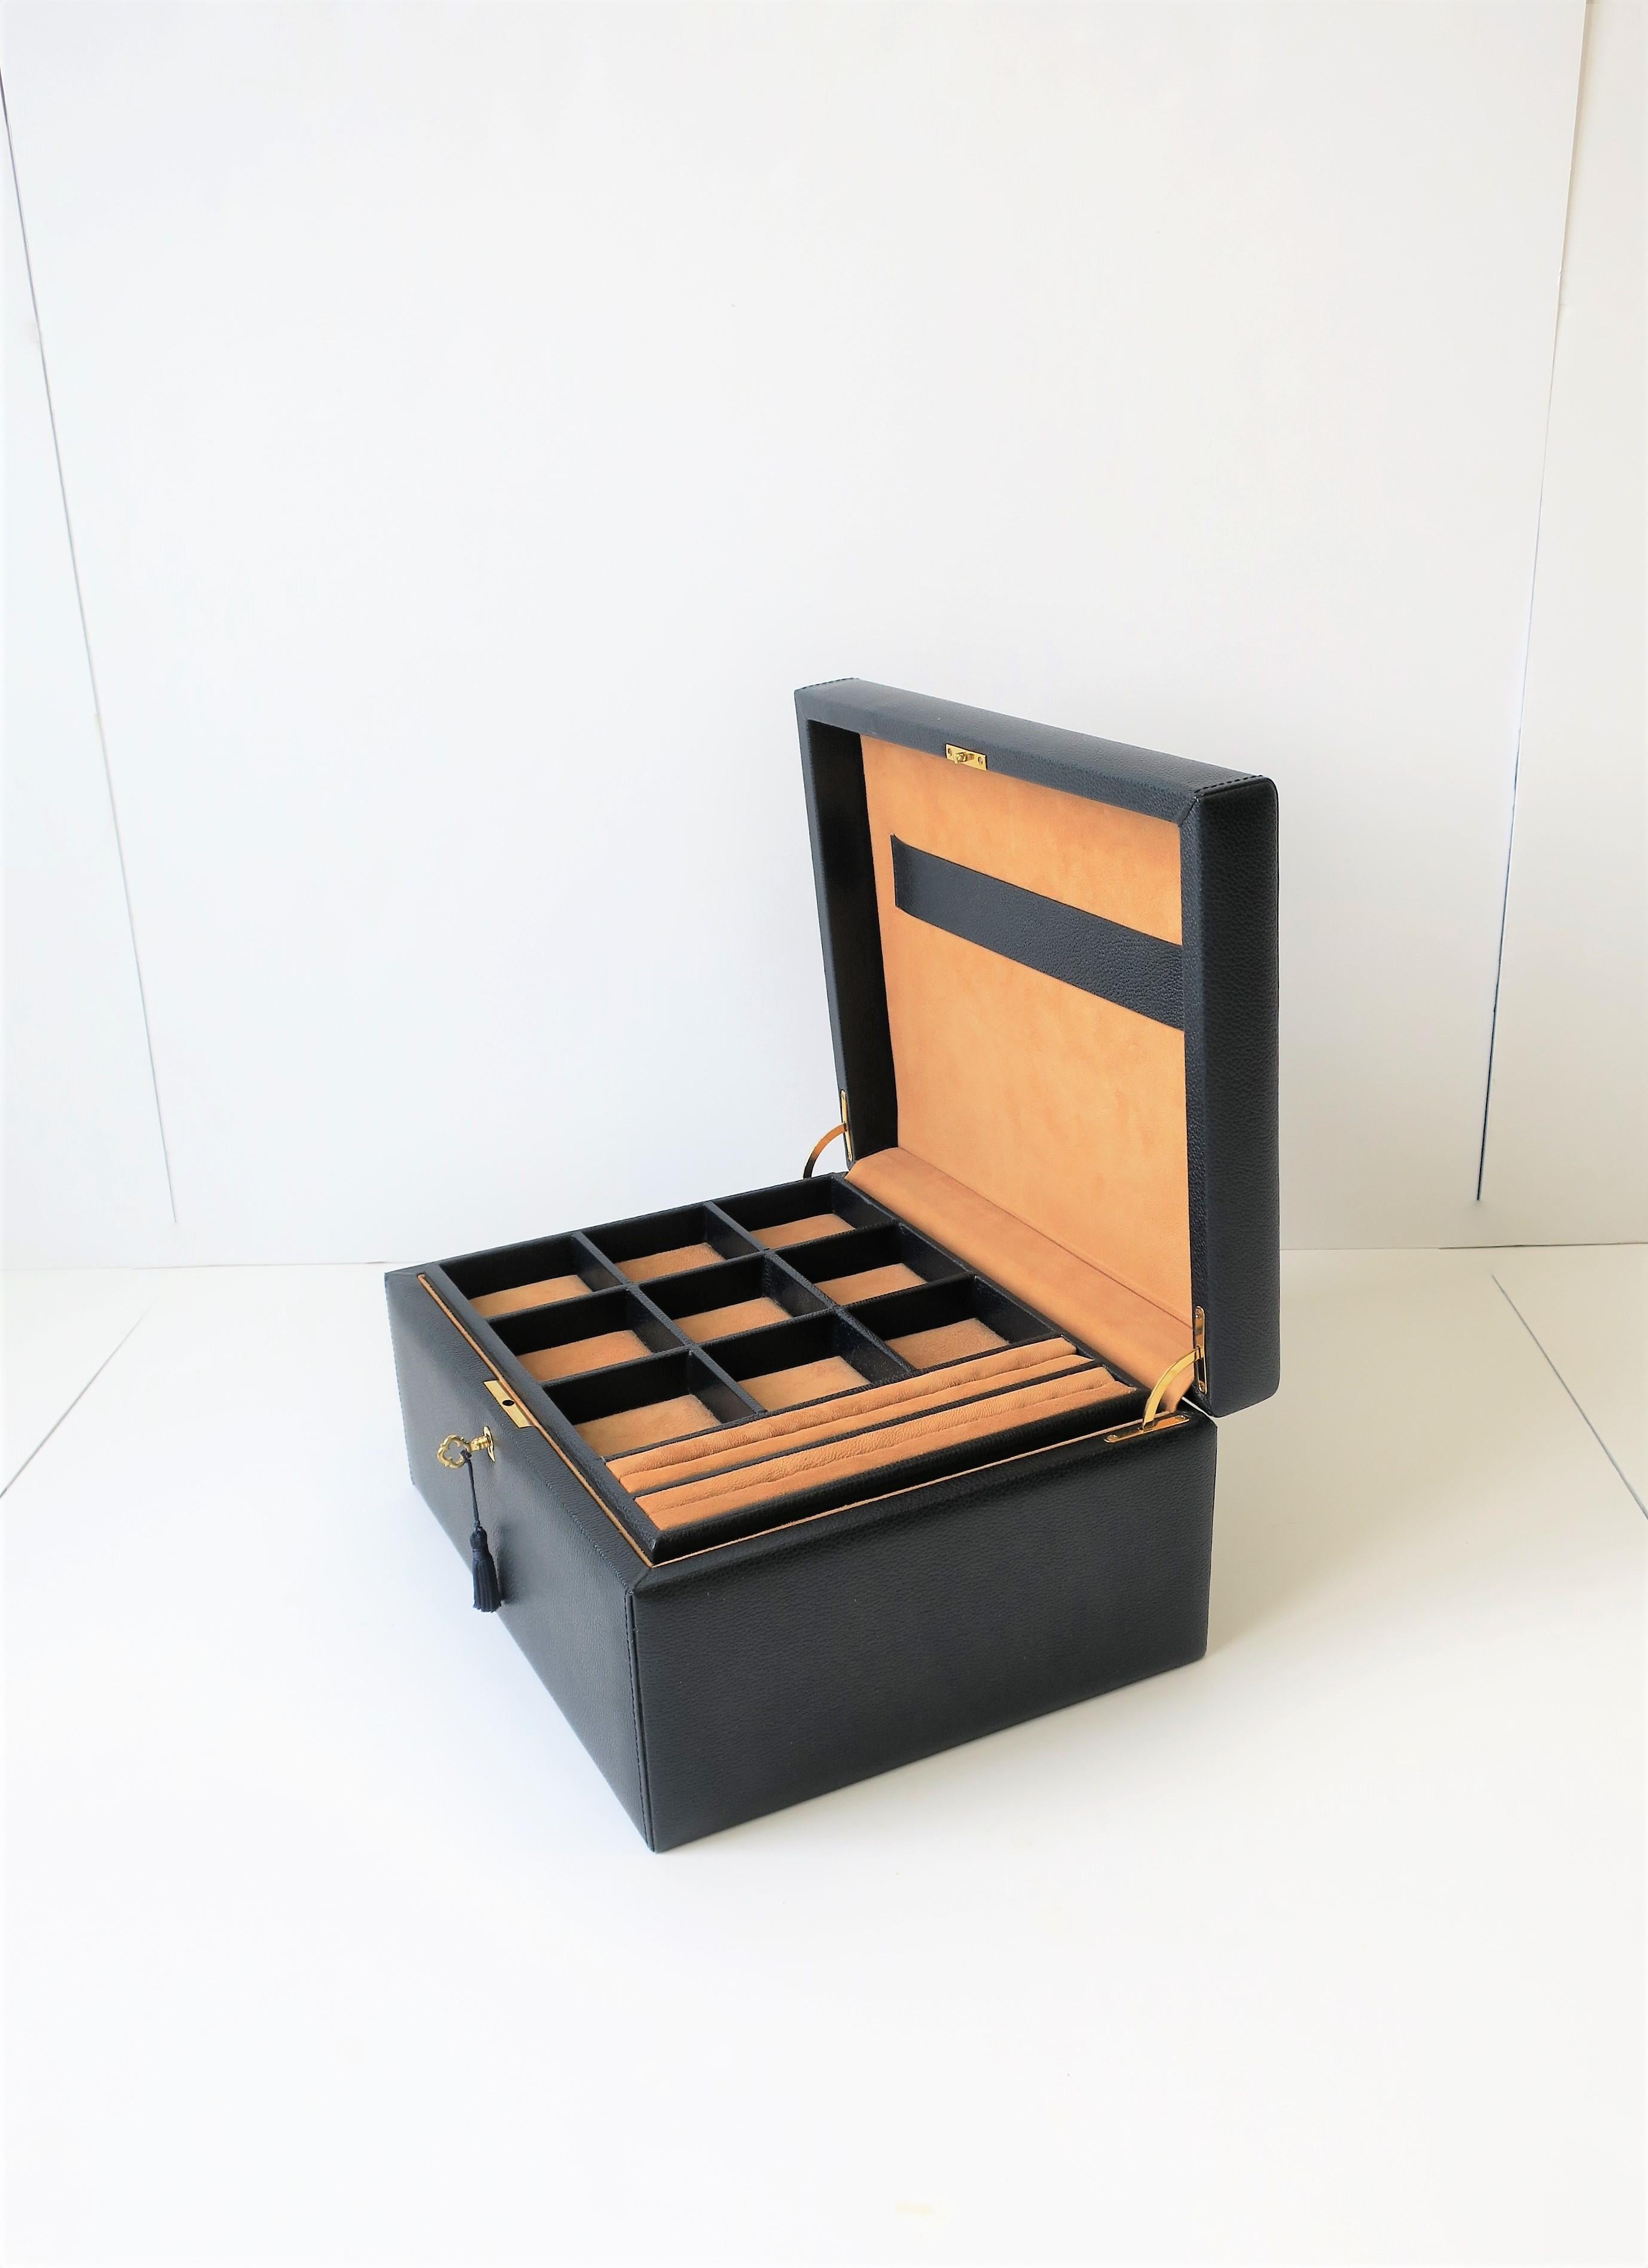 A beautiful Italian leather and suede jewelry box with brass key or lock, Italy, circa 21st century. Box has a dark blue leather exterior and a tan suede interior, with a brass key or lock with dark blue tassel. Box has an inside storage base area,